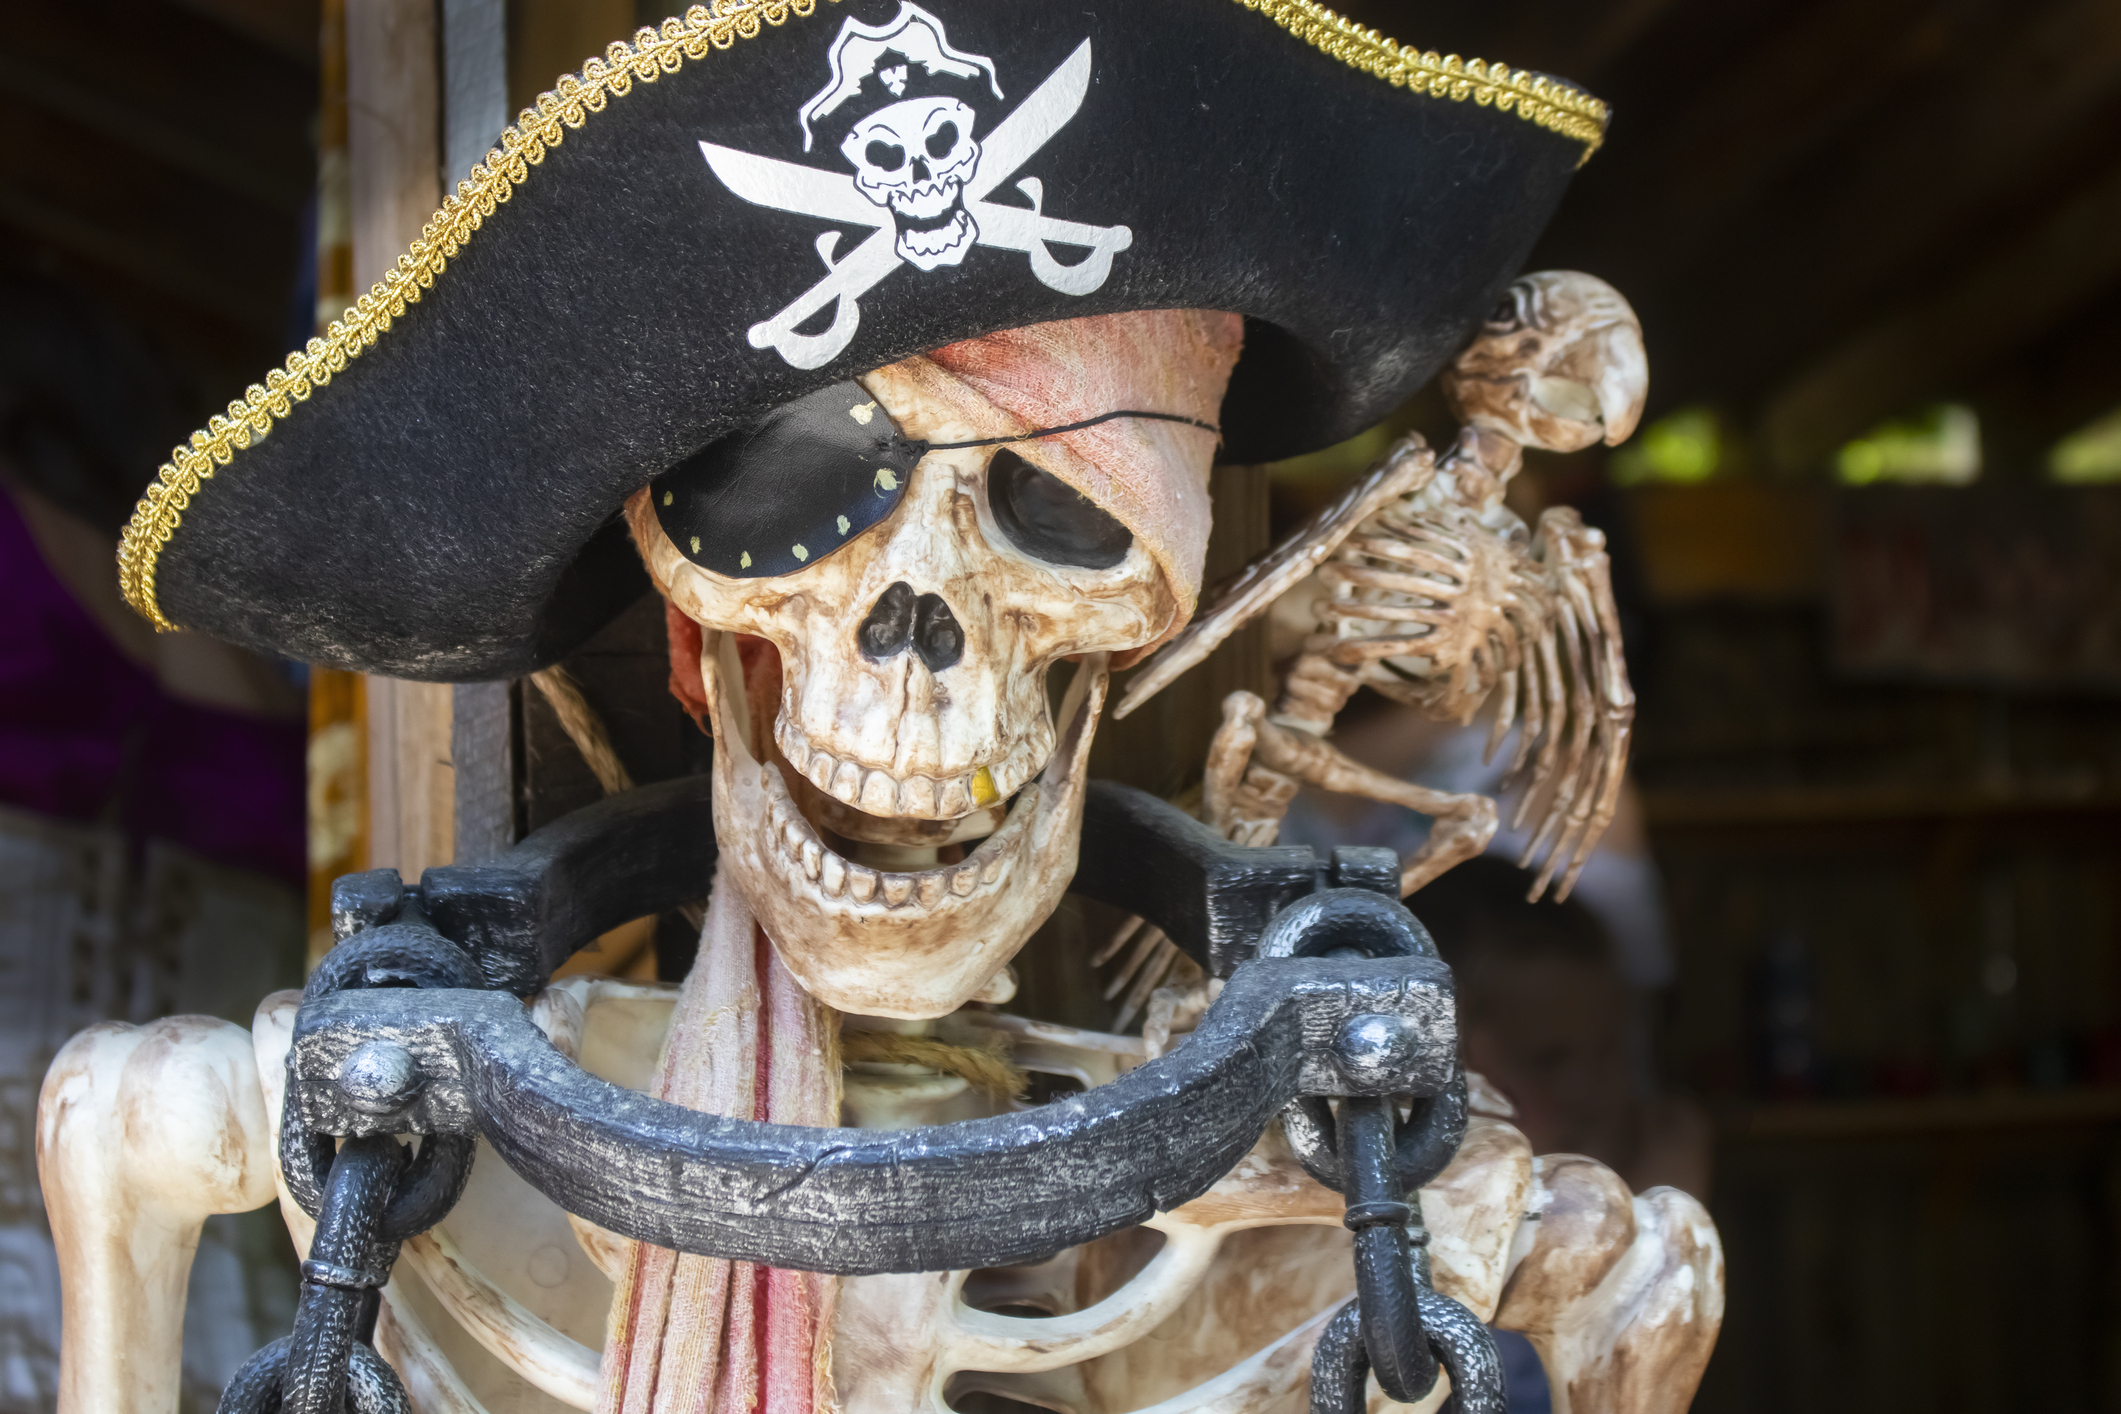 House Transformed Into Incredible Spooky Pirate Shipwreck for ...